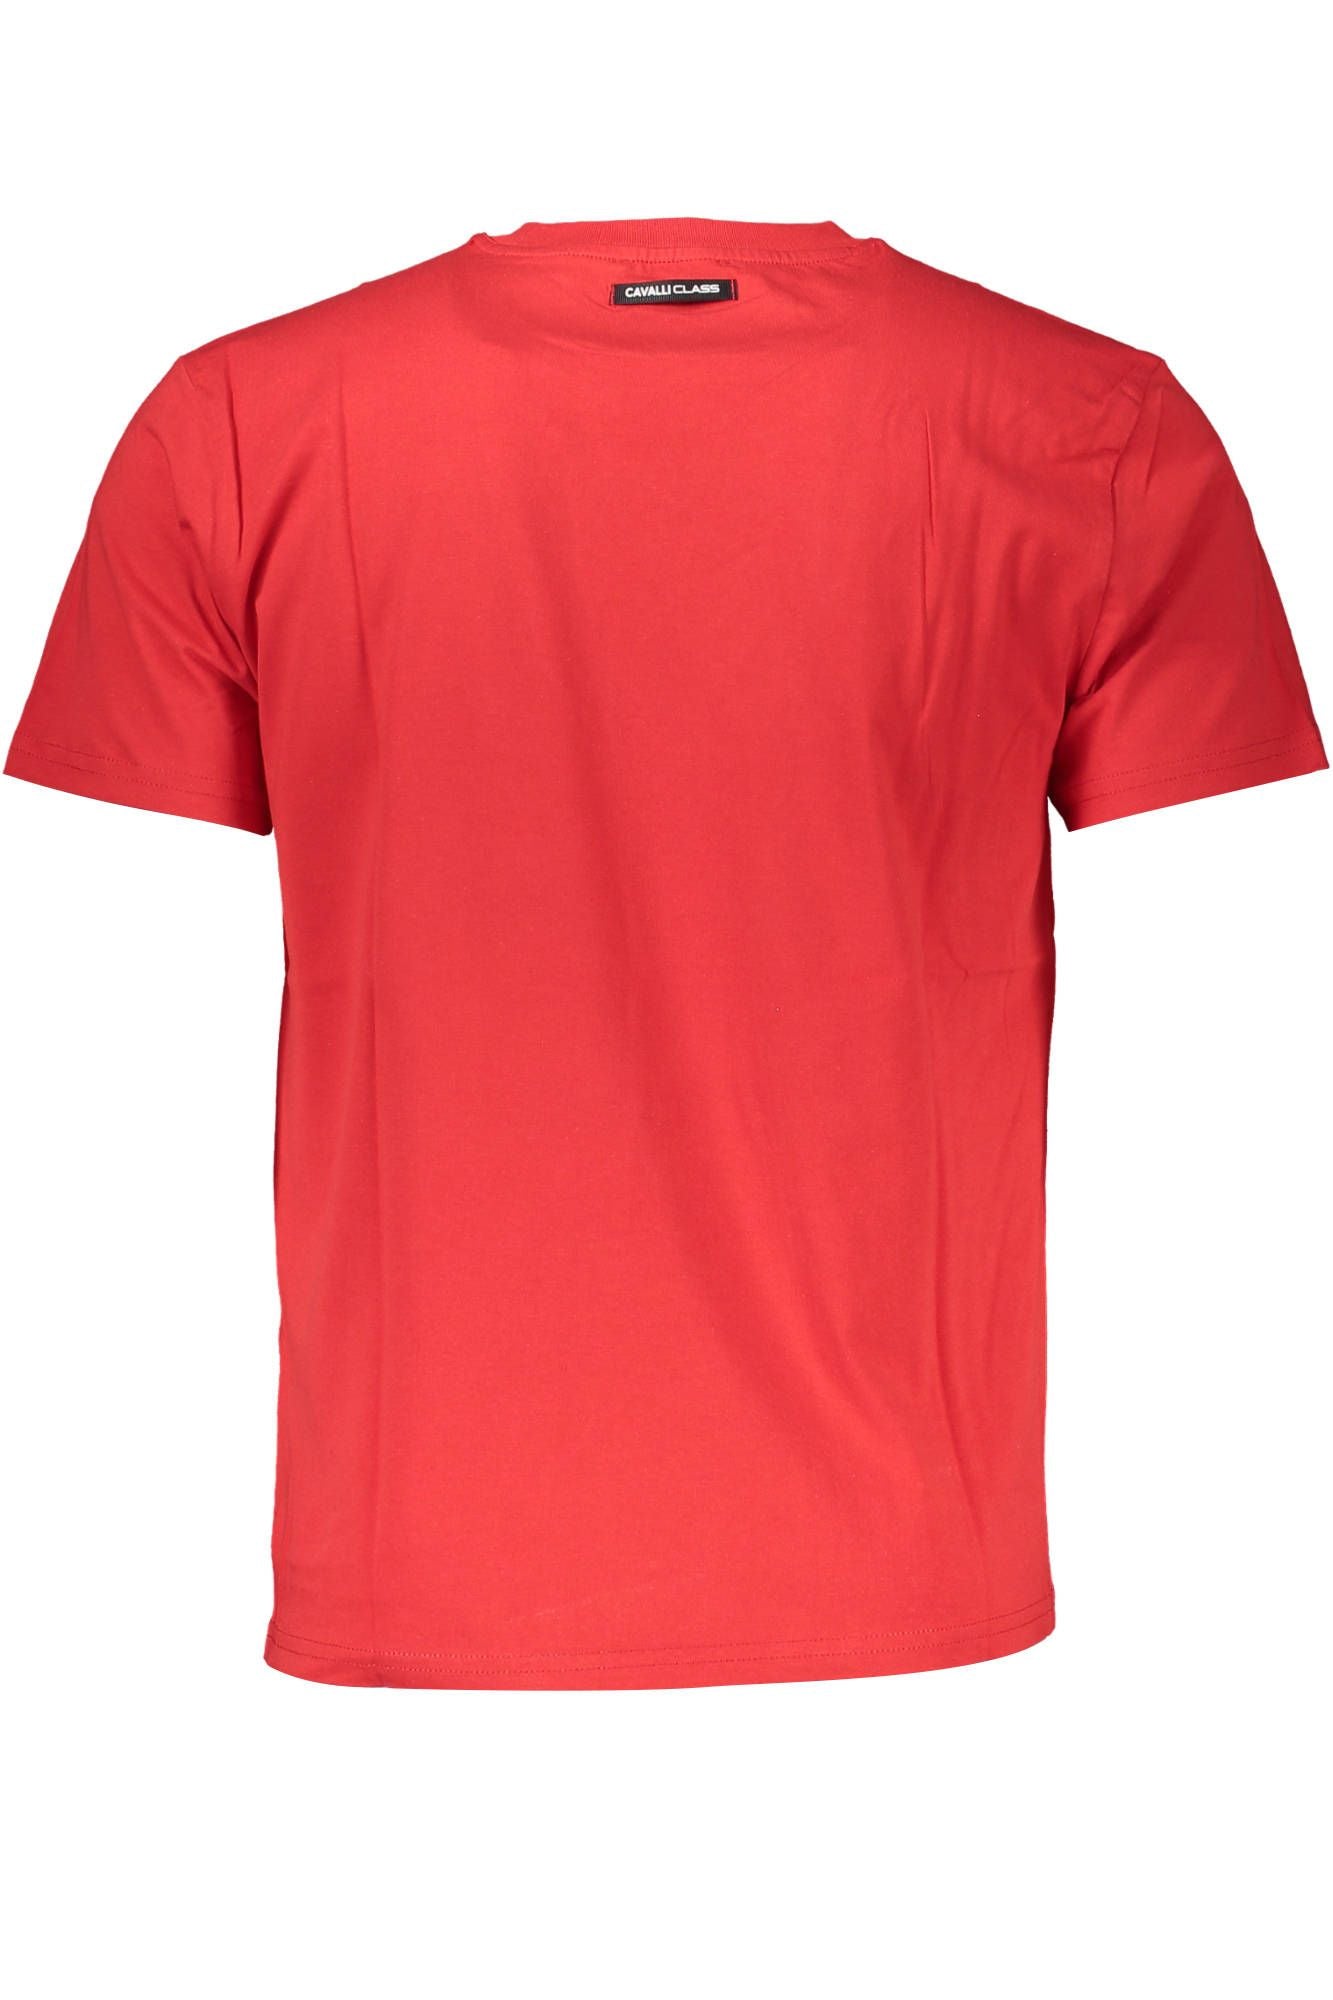 Cavalli Class Elegant Red Printed Tee with Classic Appeal